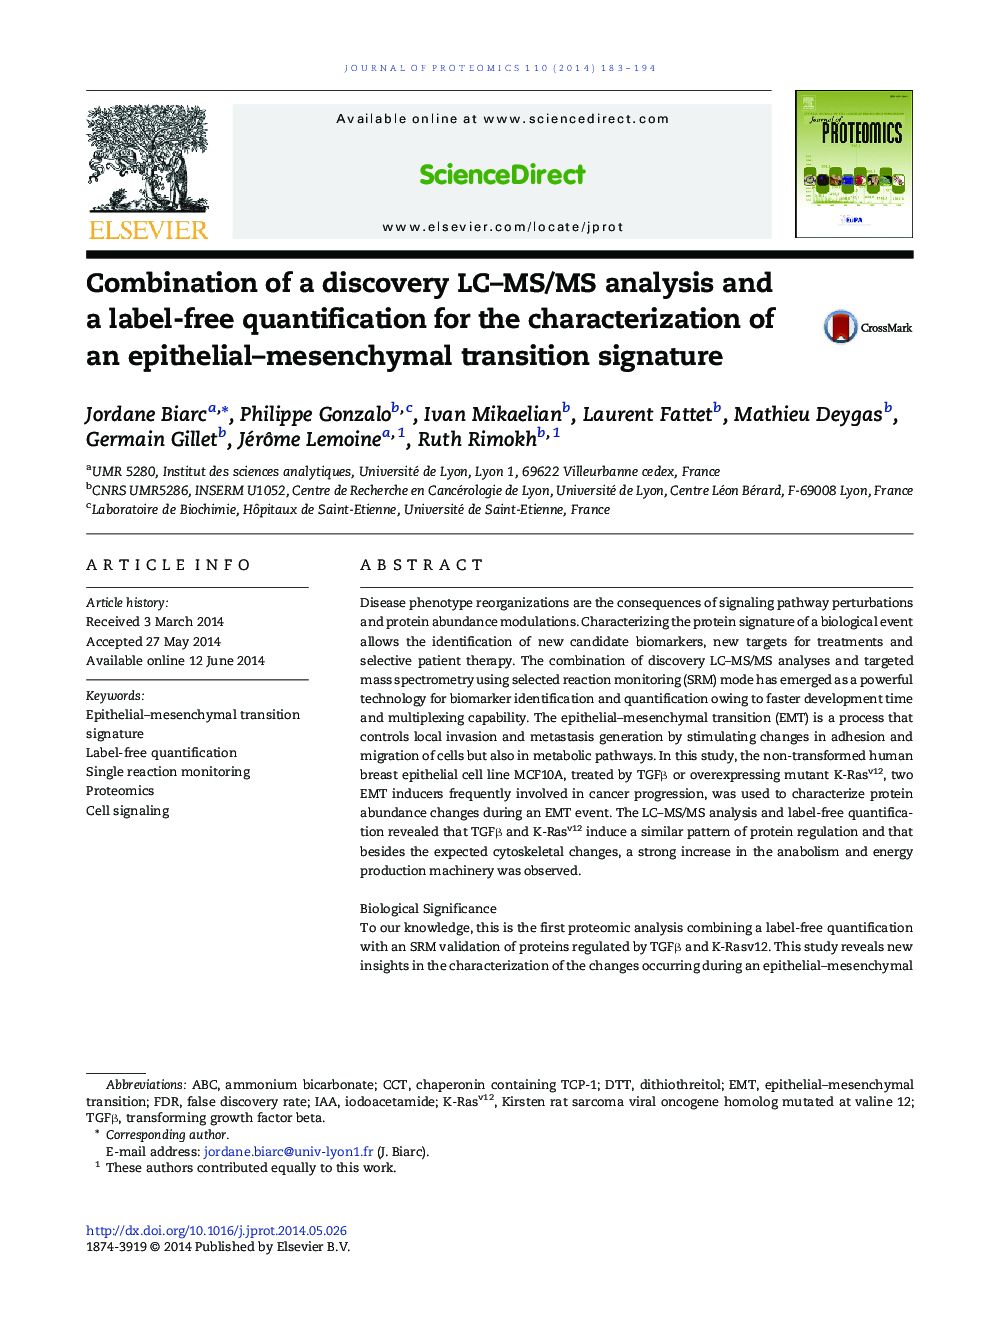 Combination of a discovery LC–MS/MS analysis and a label-free quantification for the characterization of an epithelial–mesenchymal transition signature